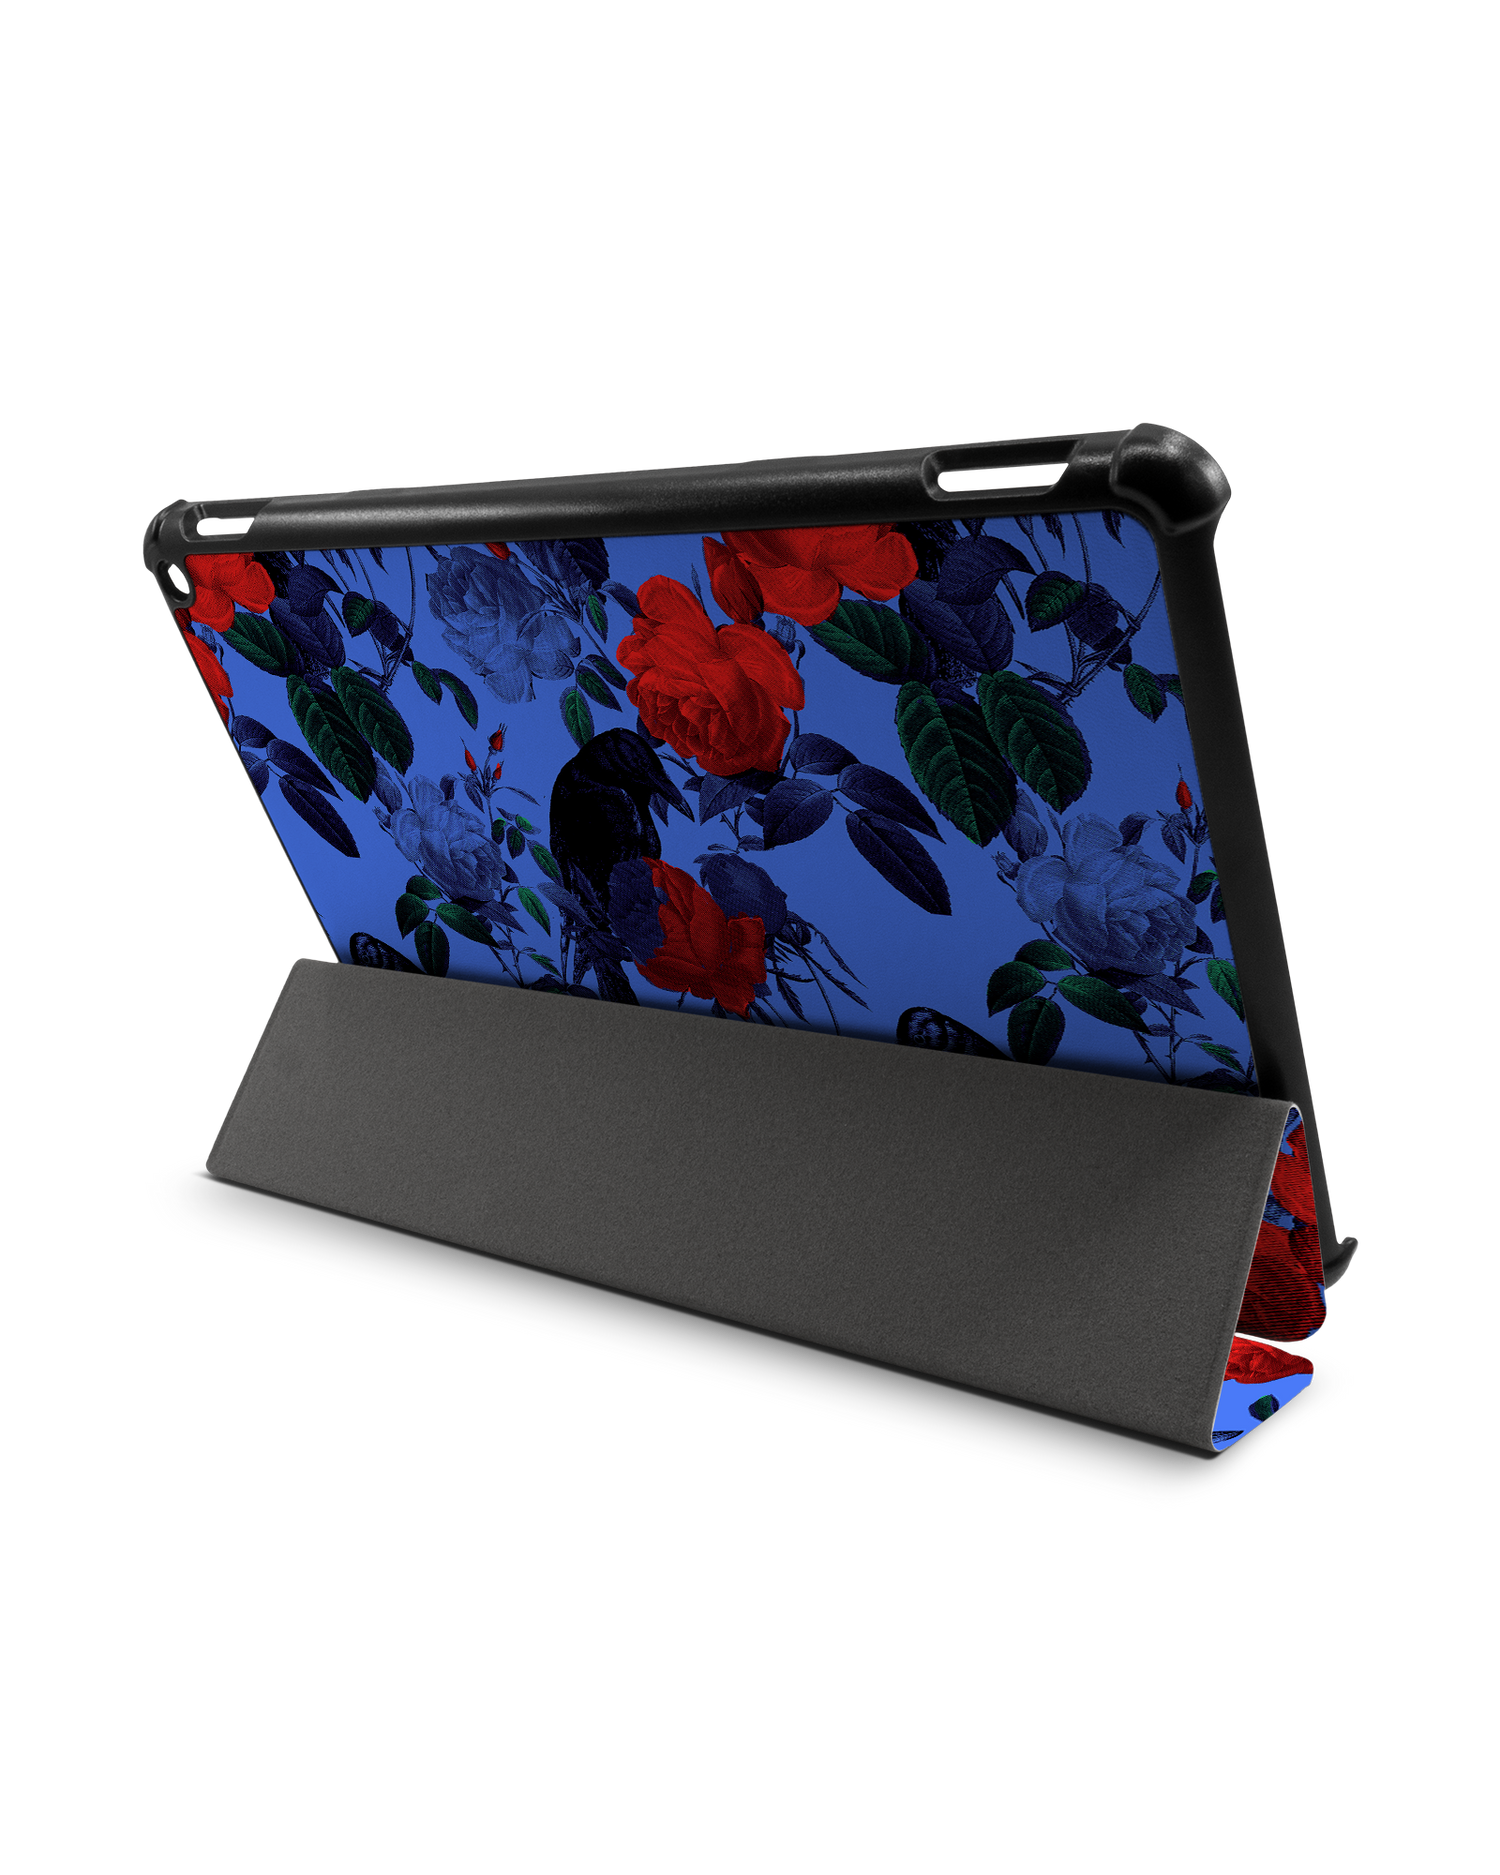 Roses And Ravens Tablet Smart Case for Amazon Fire HD 10 (2021): Used as Stand